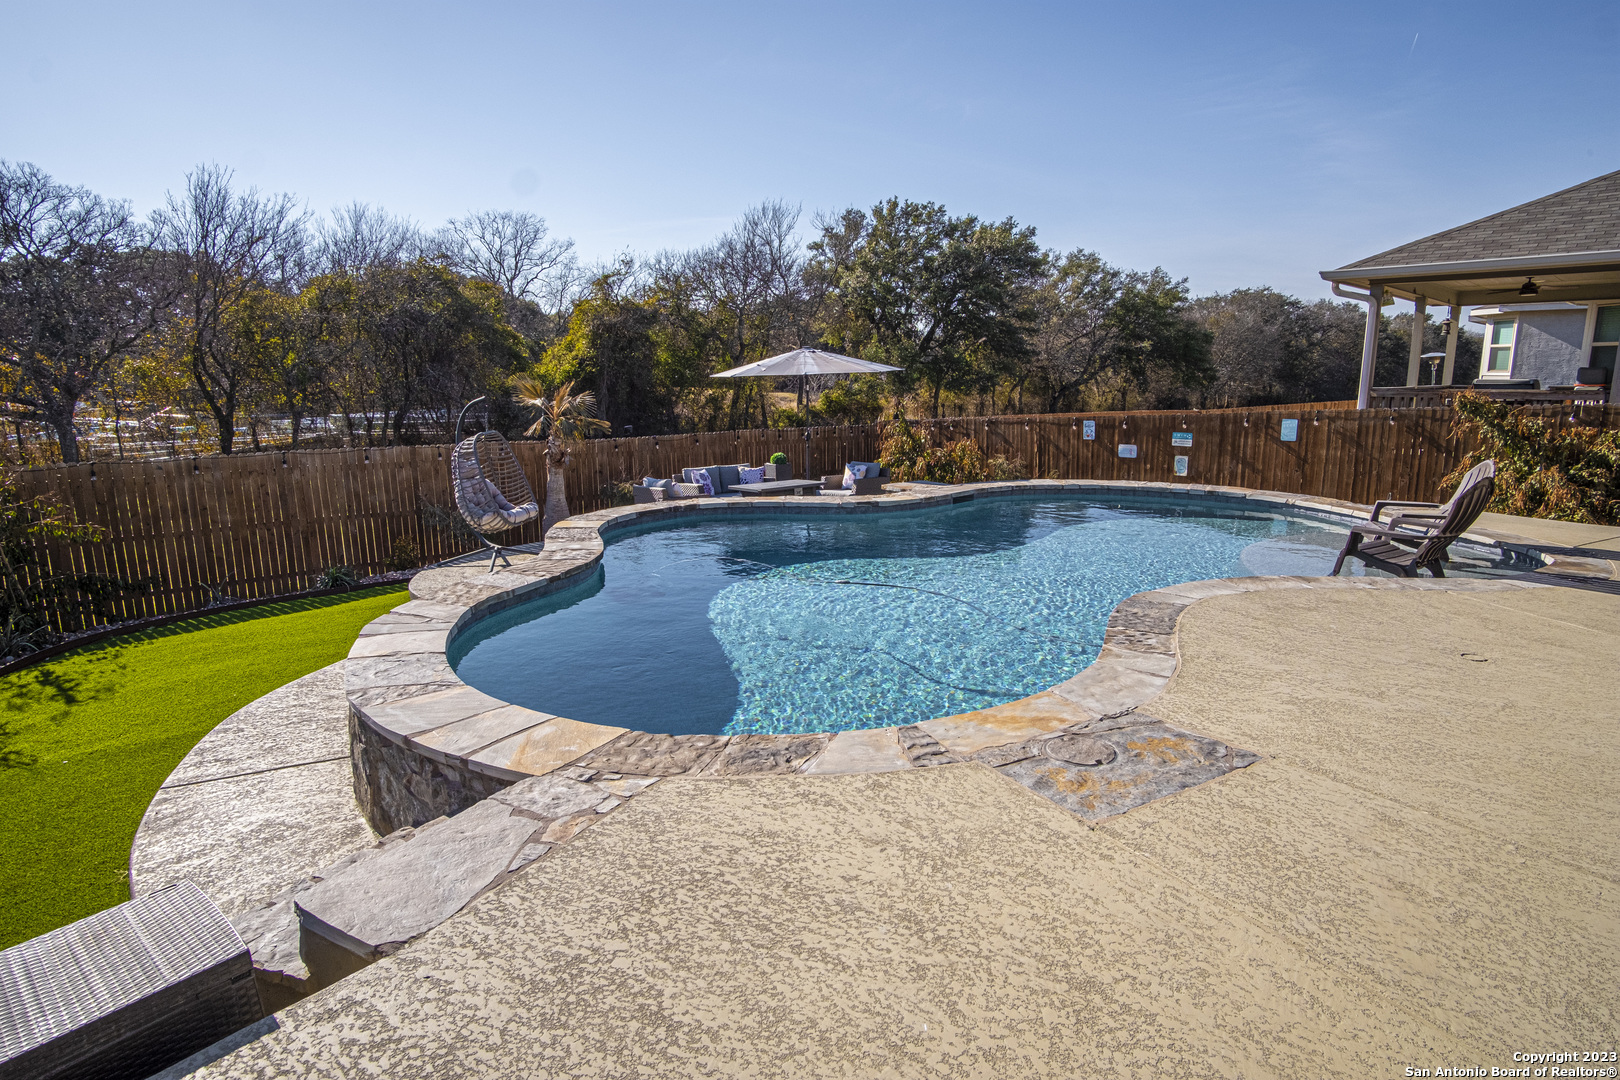 a view of a swimming pool with a yard and sitting area